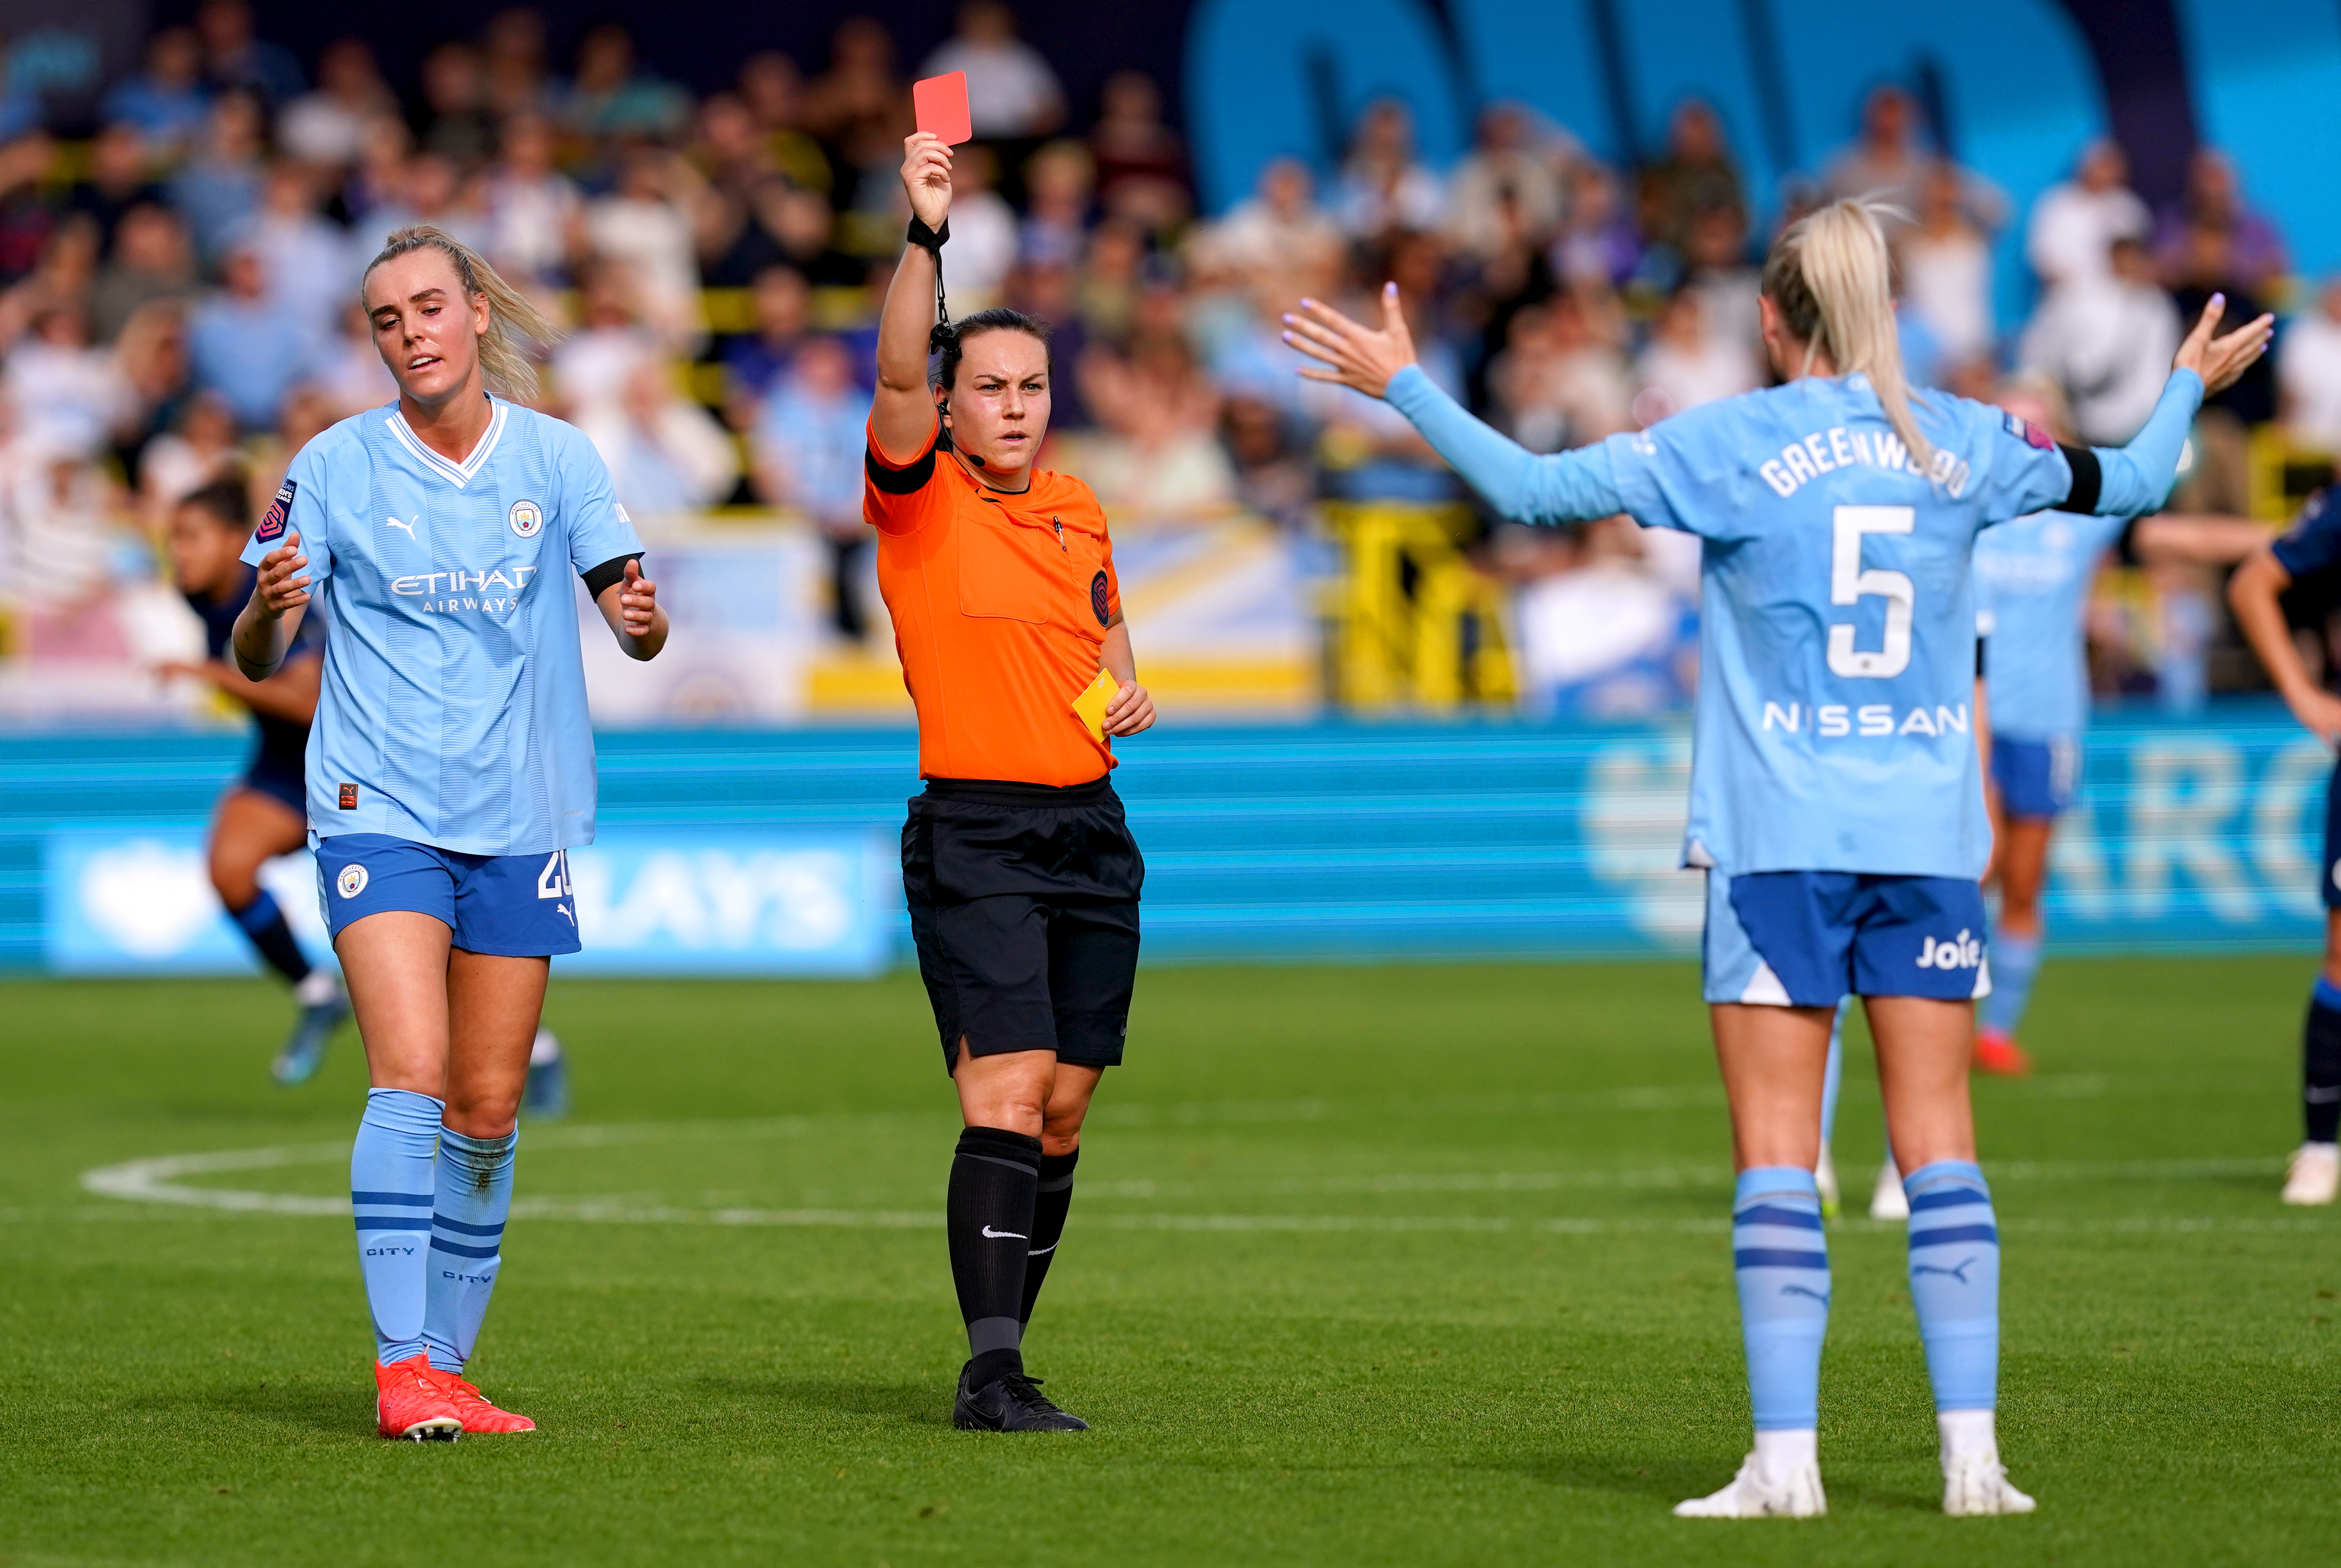 Manchester City captain Alex Greenwood was controversially sent off for time-wasting